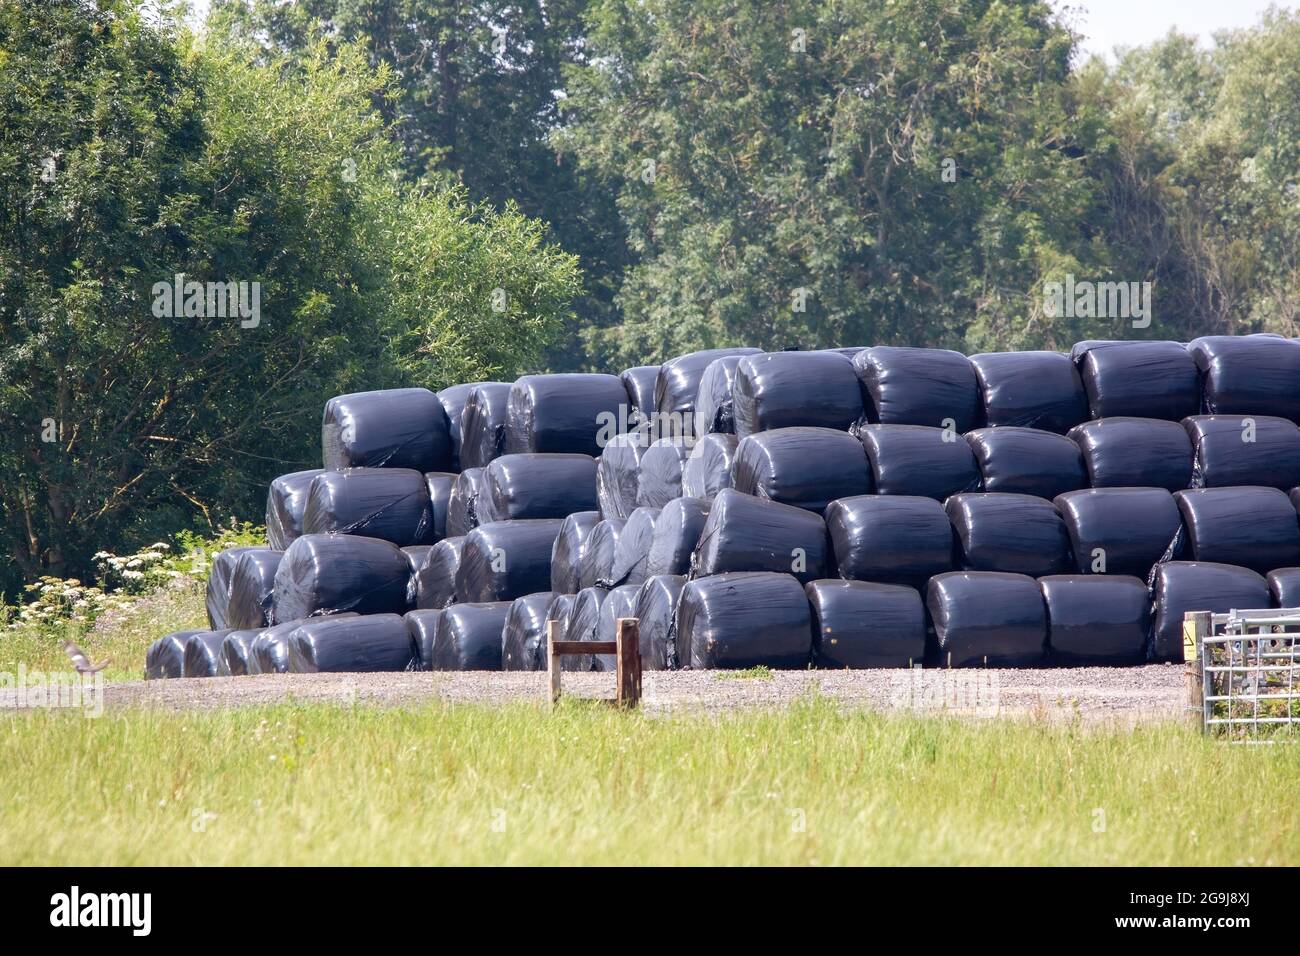 A Stack of round hay bales wrapped in black plastic in a farm field Stock Photo